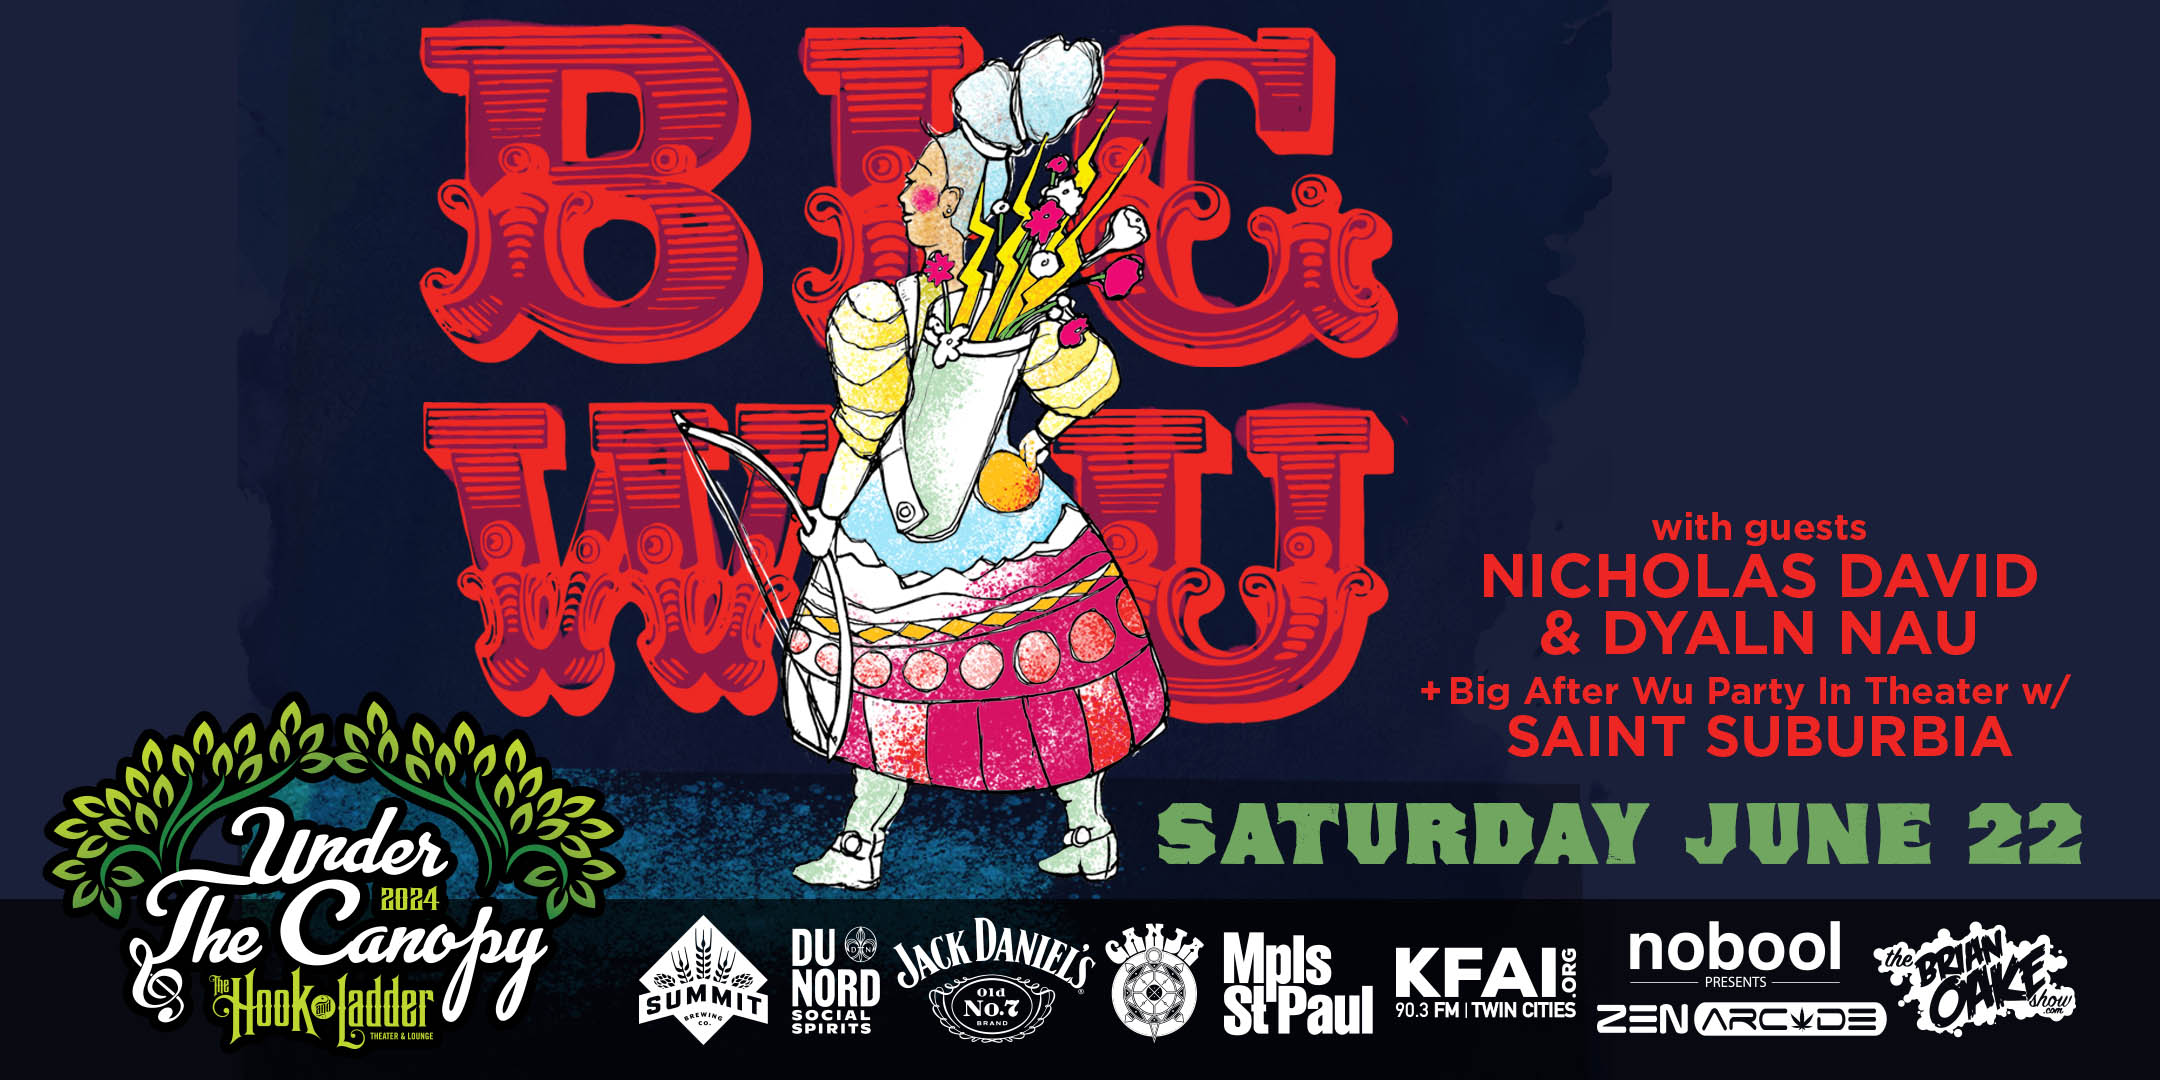 The Big Wu (2 Sets) with guests Nicholas David & Dylan Nau + Big After Wu Party in Theater with Saint Suburbia Saturday, June 22 Under The Canopy at The Hook and Ladder Theater "An Urban Outdoor Summer Concert Series" Doors 5:00pm :: Music 6:00pm :: 21+ Reserved Seats: $40 GA: $20 ADV / $26 DOS